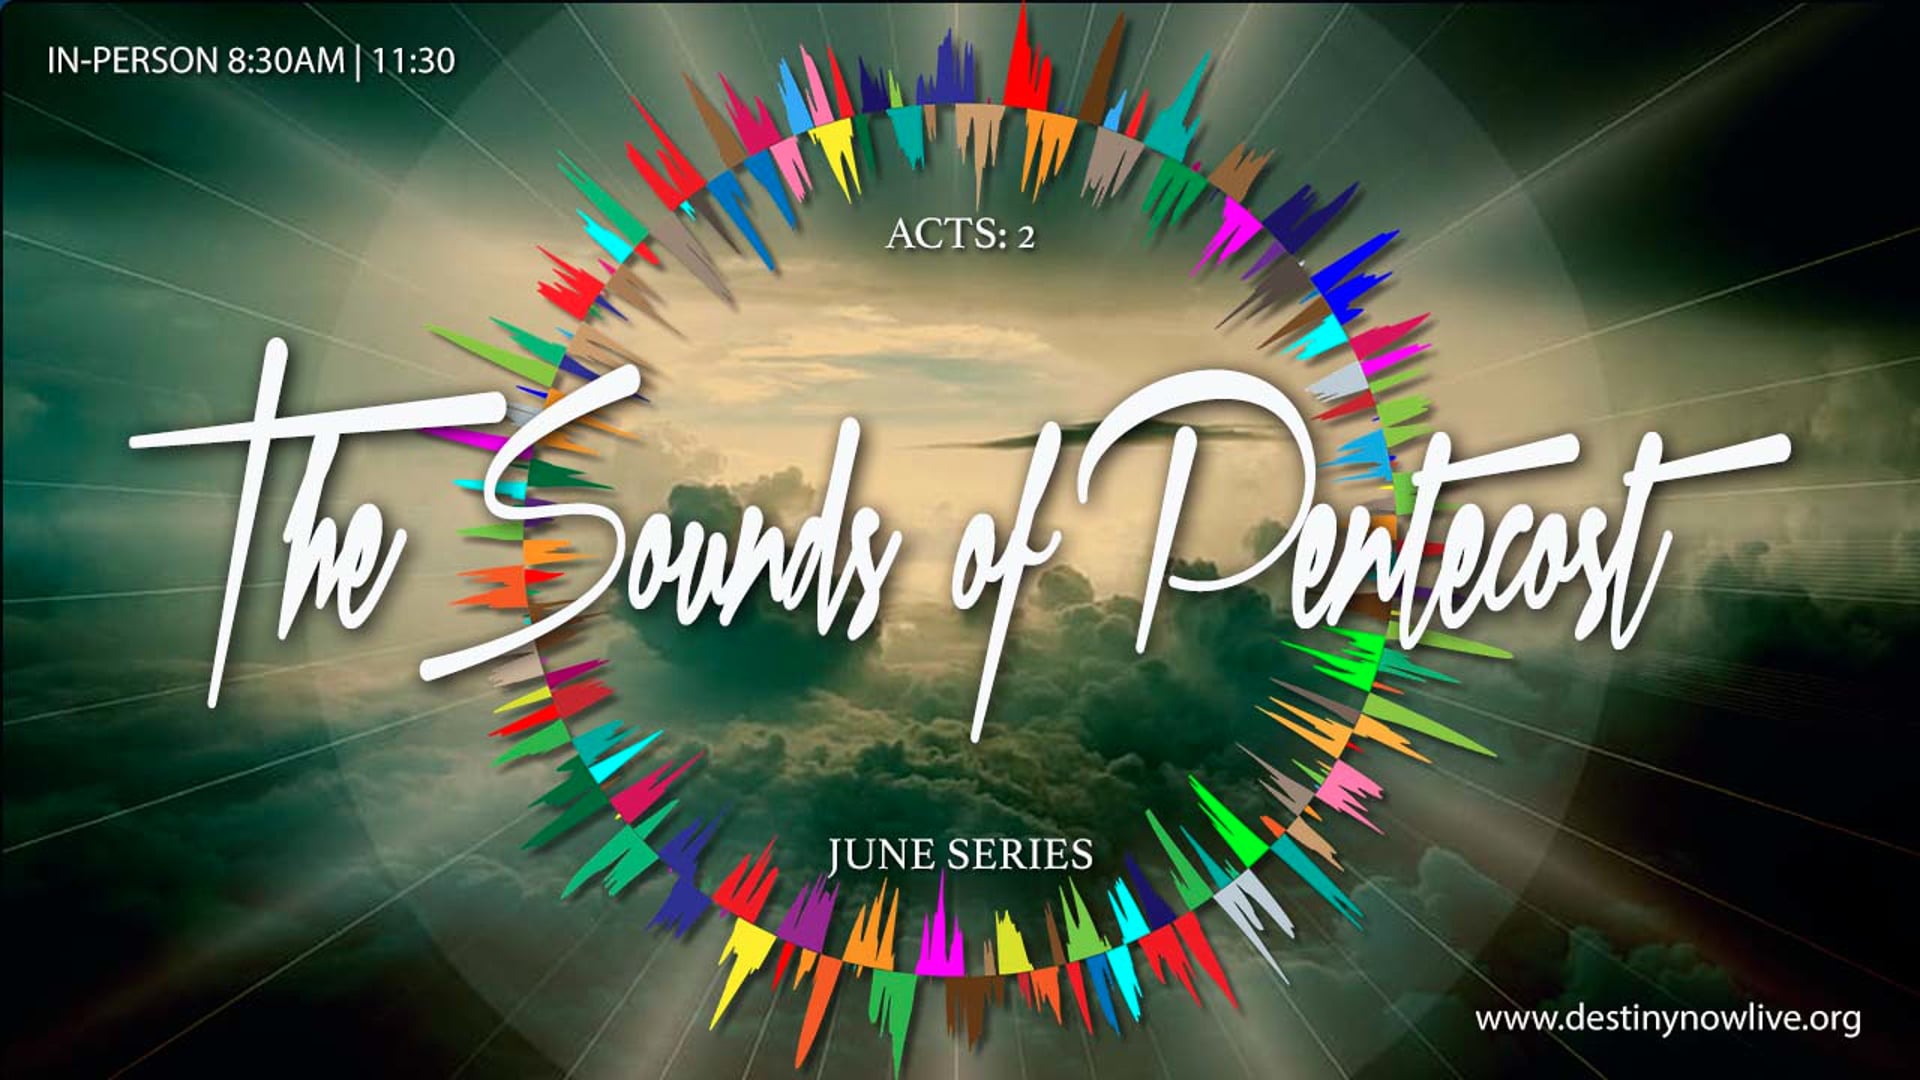 "The Sounds of Pentecost" - Text to Give - 910-460-3377 - Give Online @ www.destinynow.org